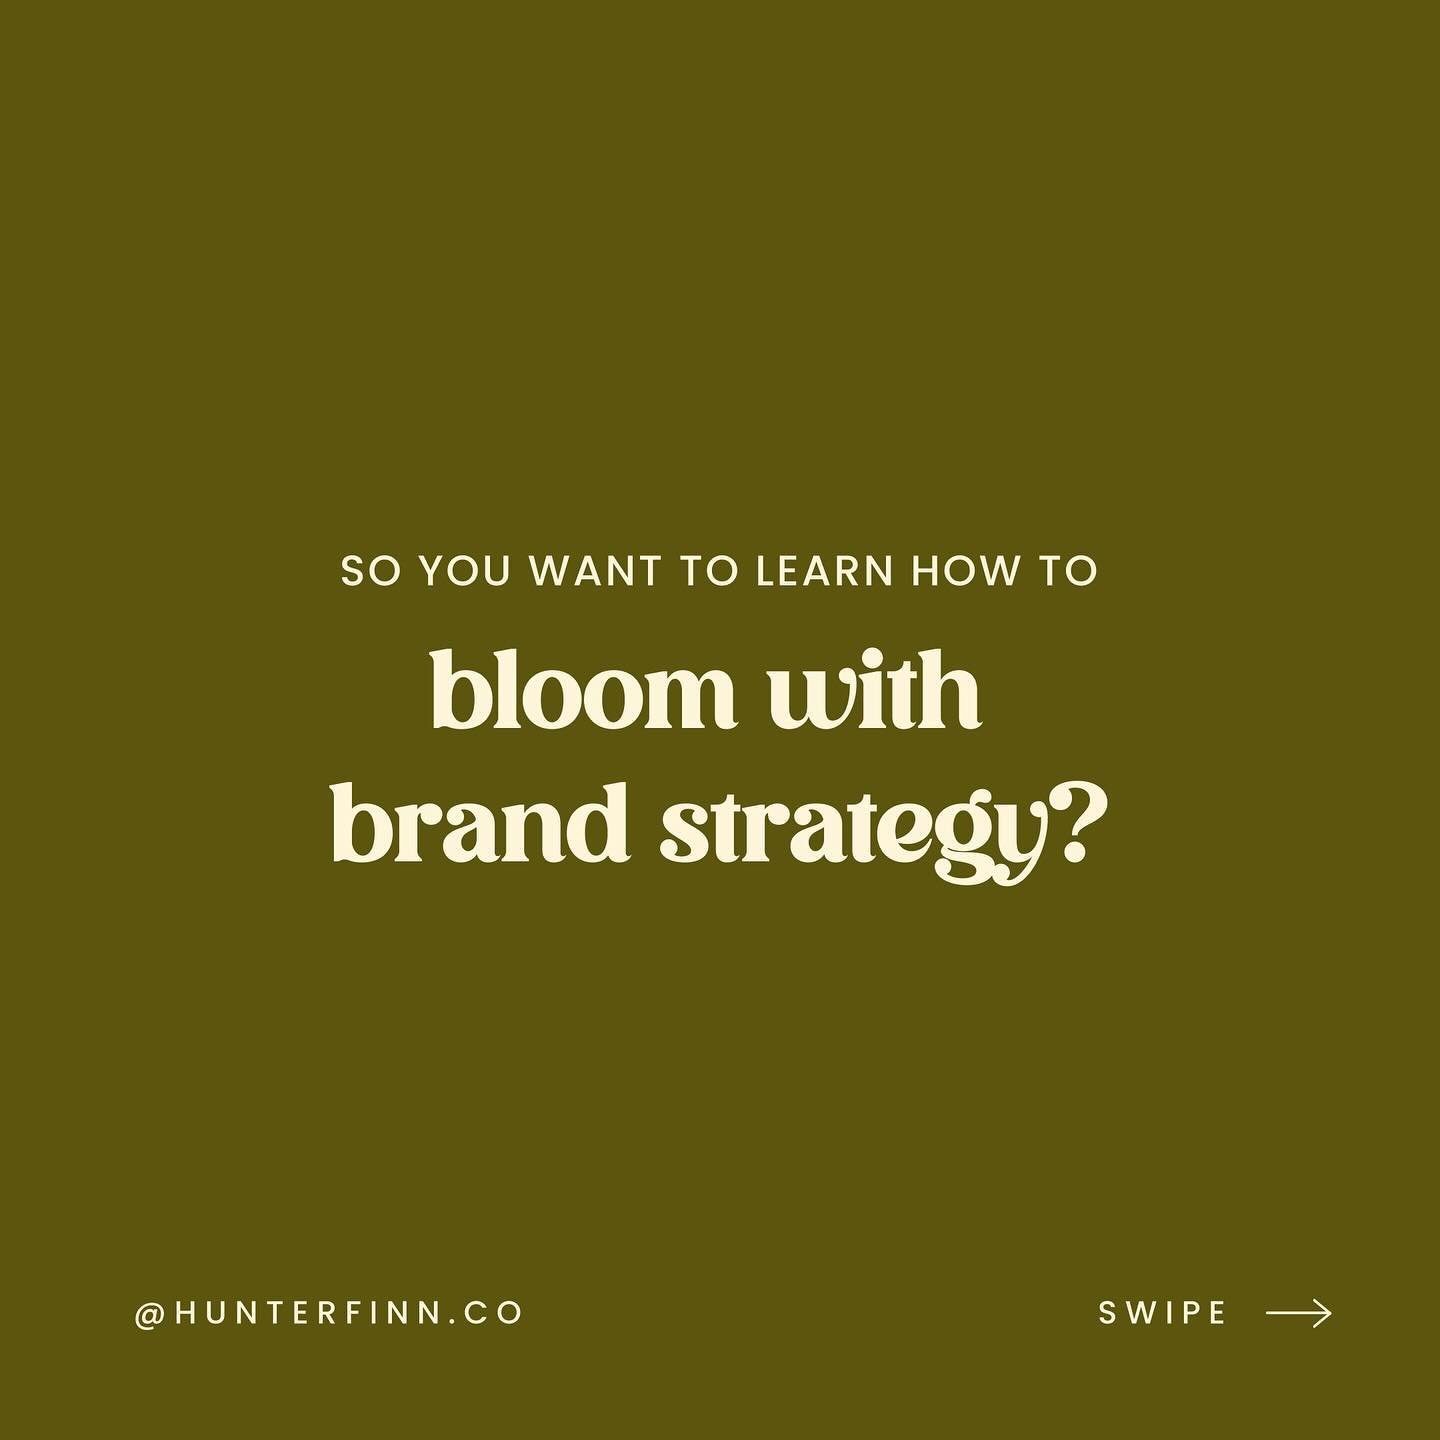 🌸 Will I see you this Saturday at our &ldquo;Bloom With Brand Strategy&rdquo; workshop? If you&rsquo;re joining us, drop a flower emoji in the comments! 🌼🌻

We&rsquo;re gearing up for an inspiring afternoon filled with insightful brand strategy di